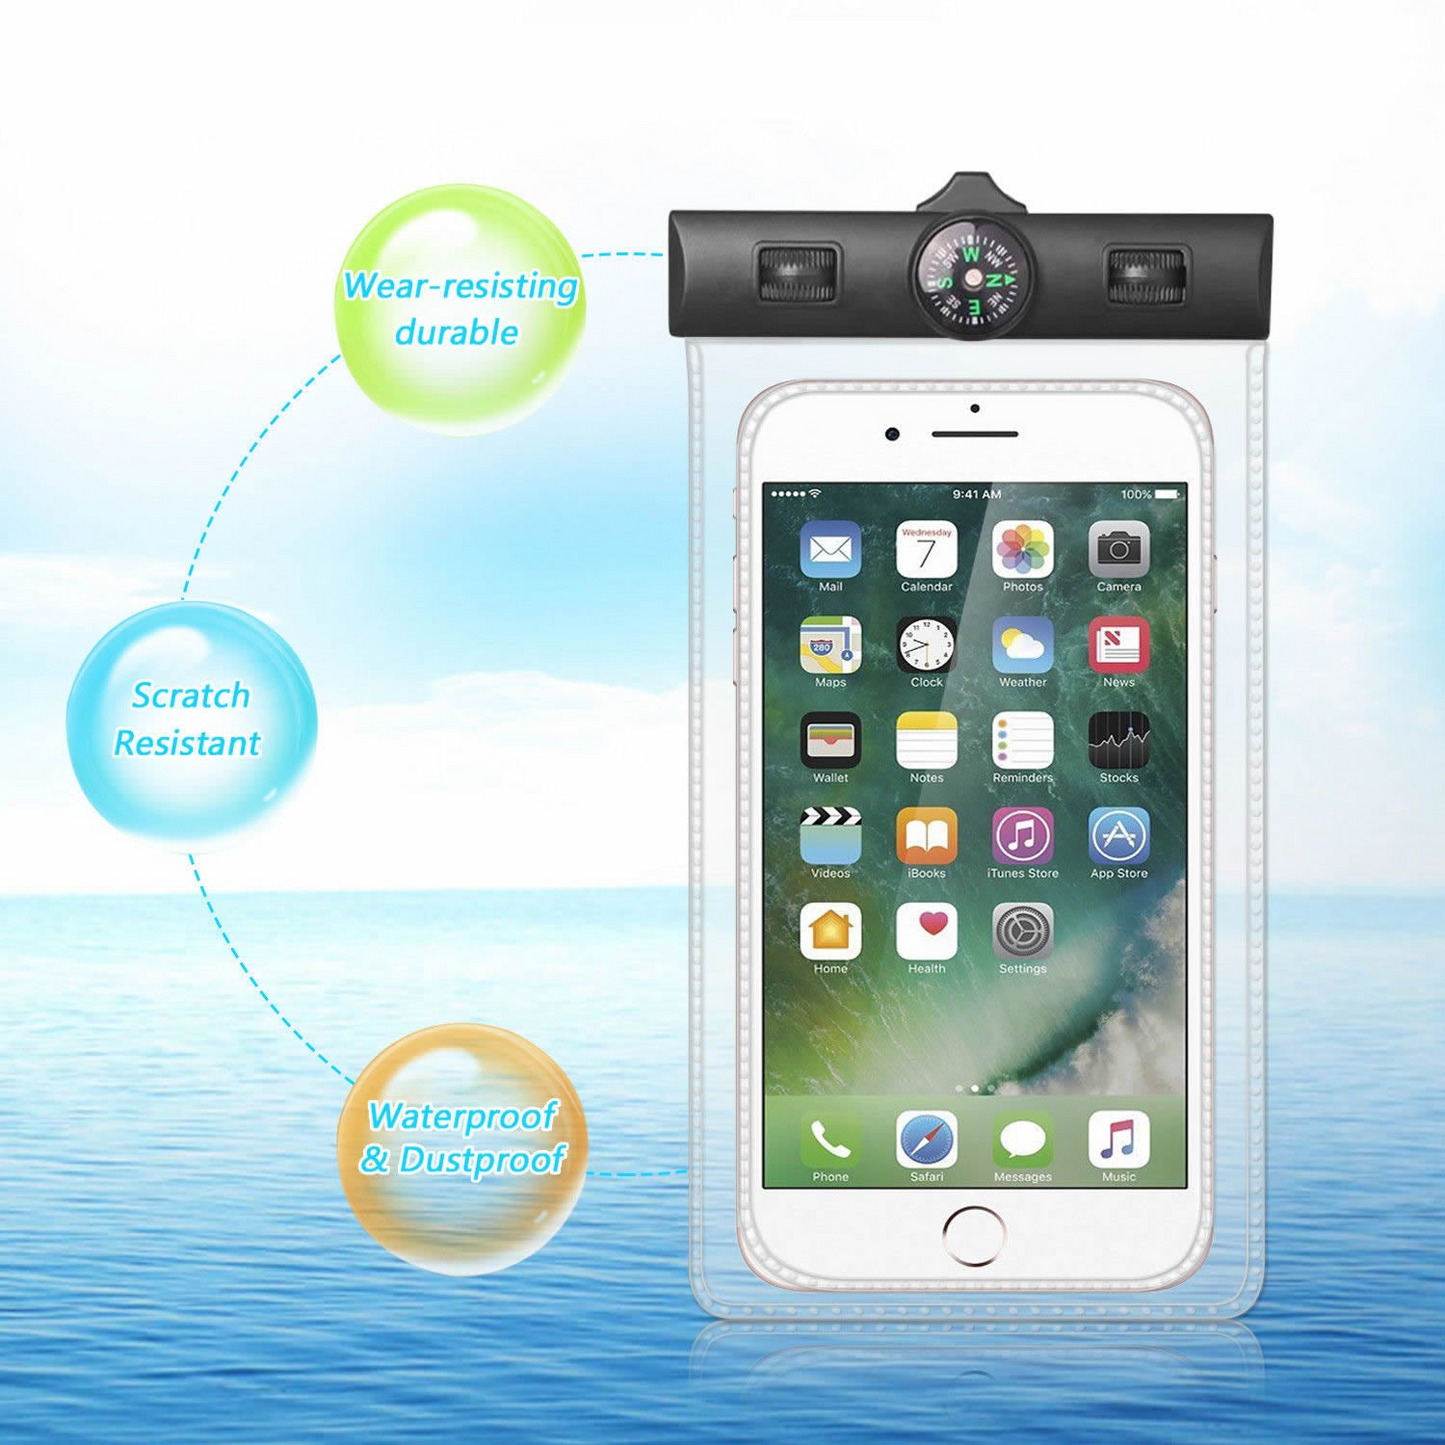 AQUA POUCH - Waterproof Pouch for your Smartphone and your Essentials